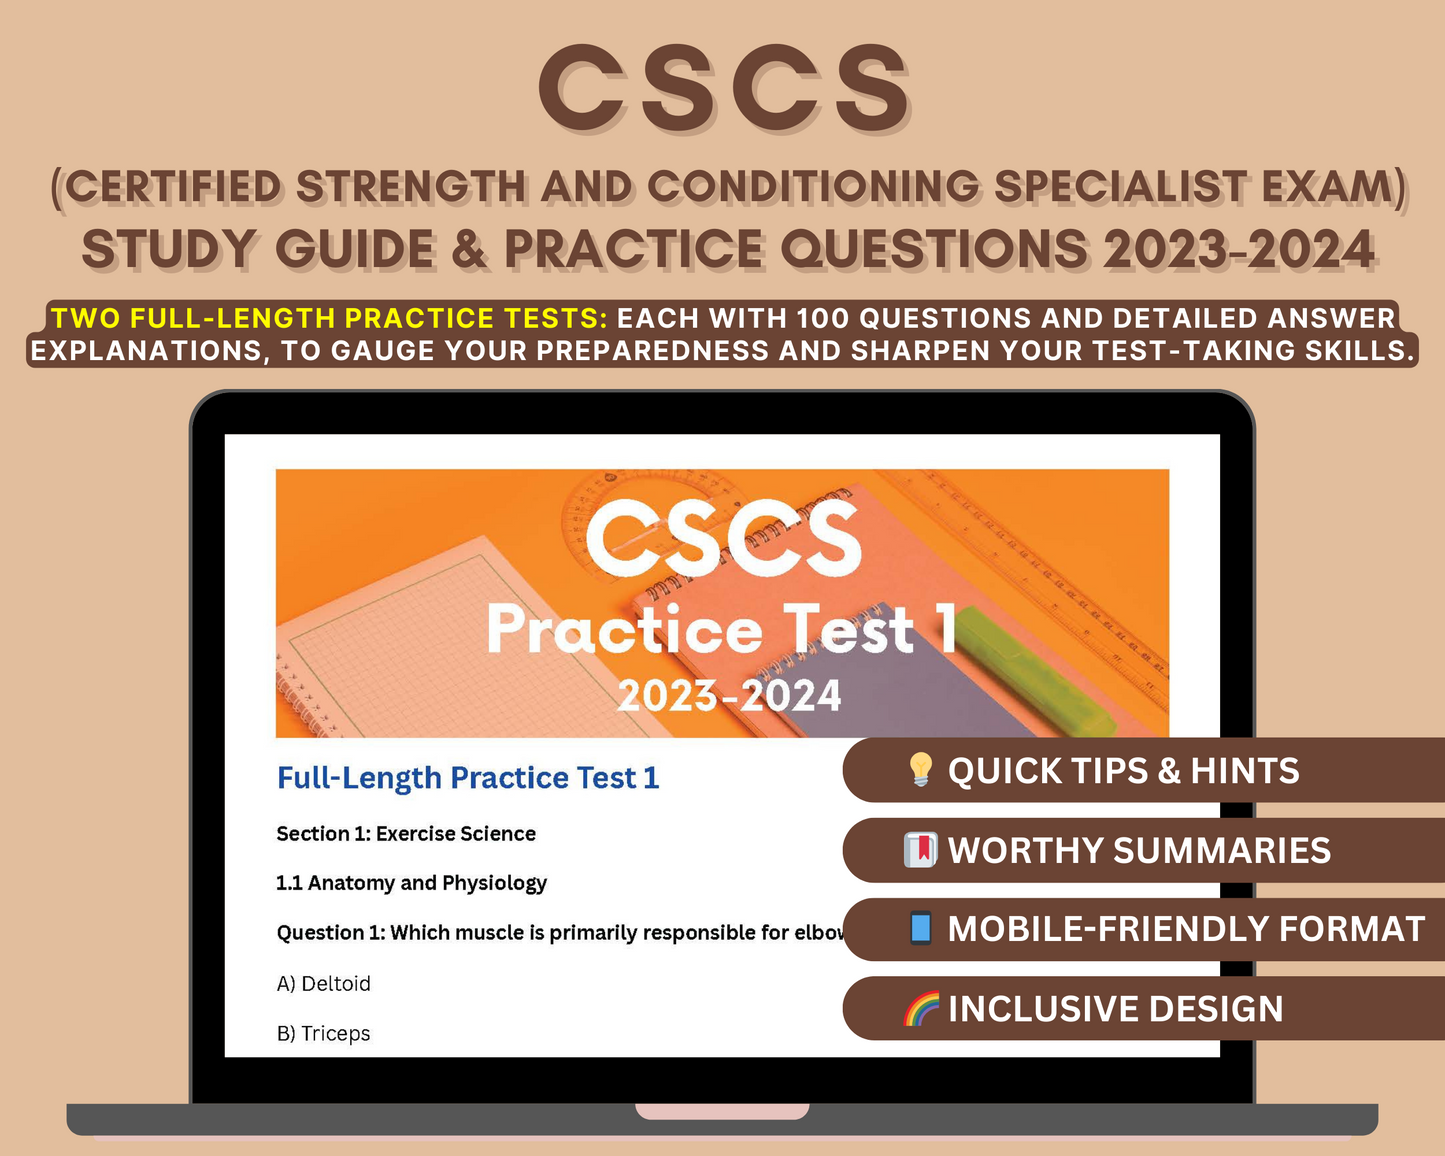 CSCS Exam Study Guide 2023-24: Master the Fitness Certification with In-Depth Content Review, Practice Tests & Exam Tips